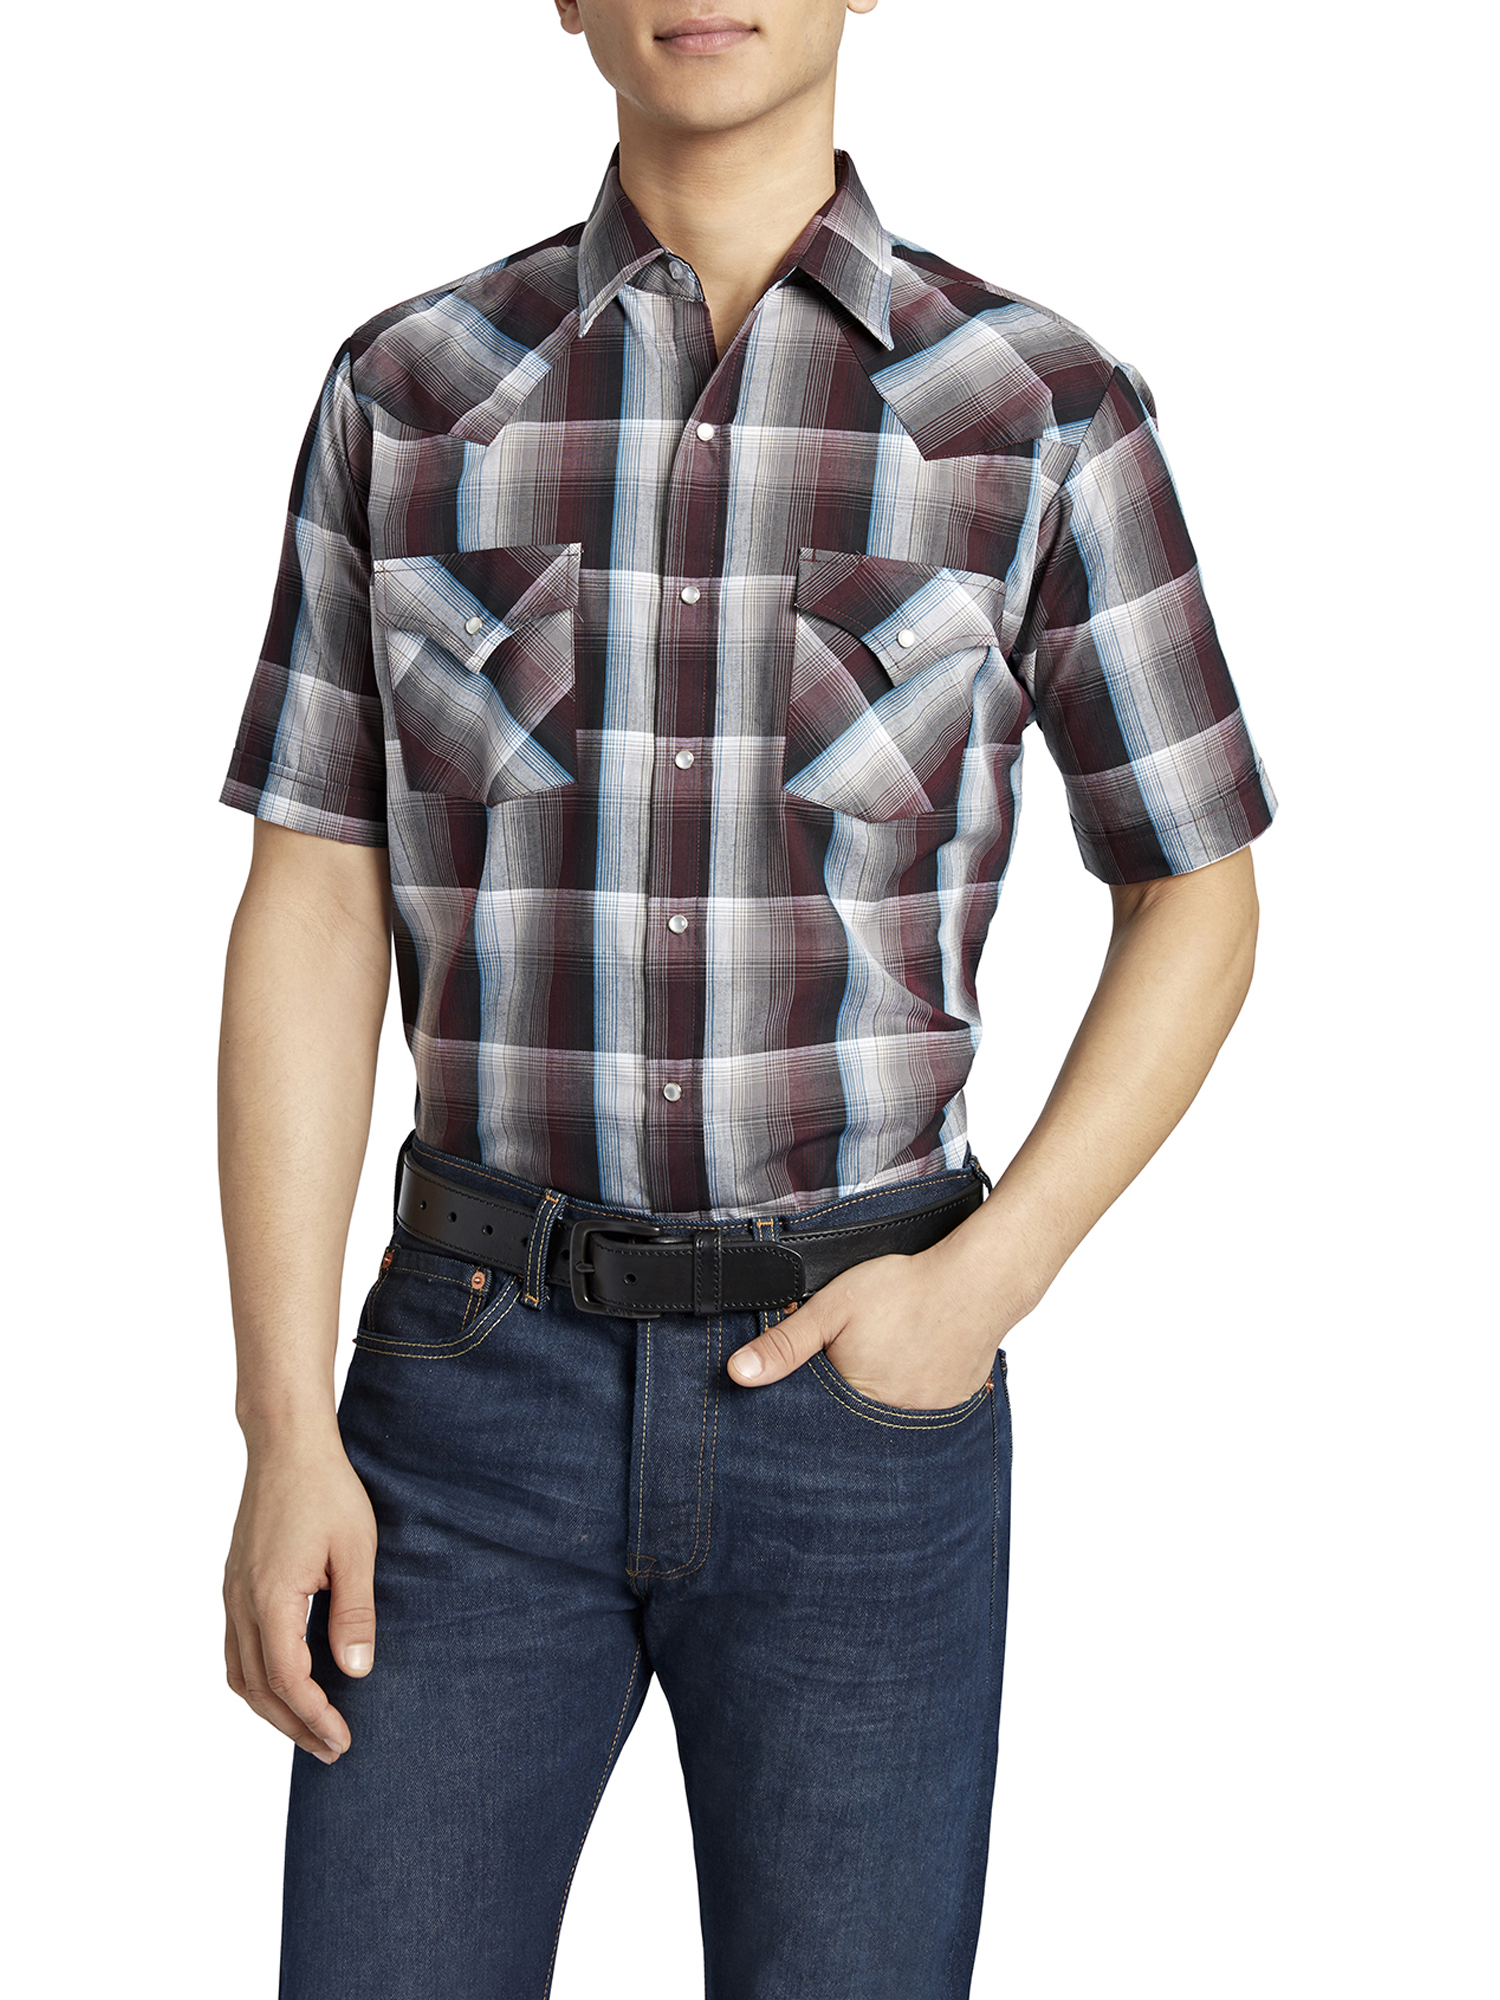 Ely Cattleman Men's Short Sleeve Snap Front Plaid Western Shirt - image 1 of 3